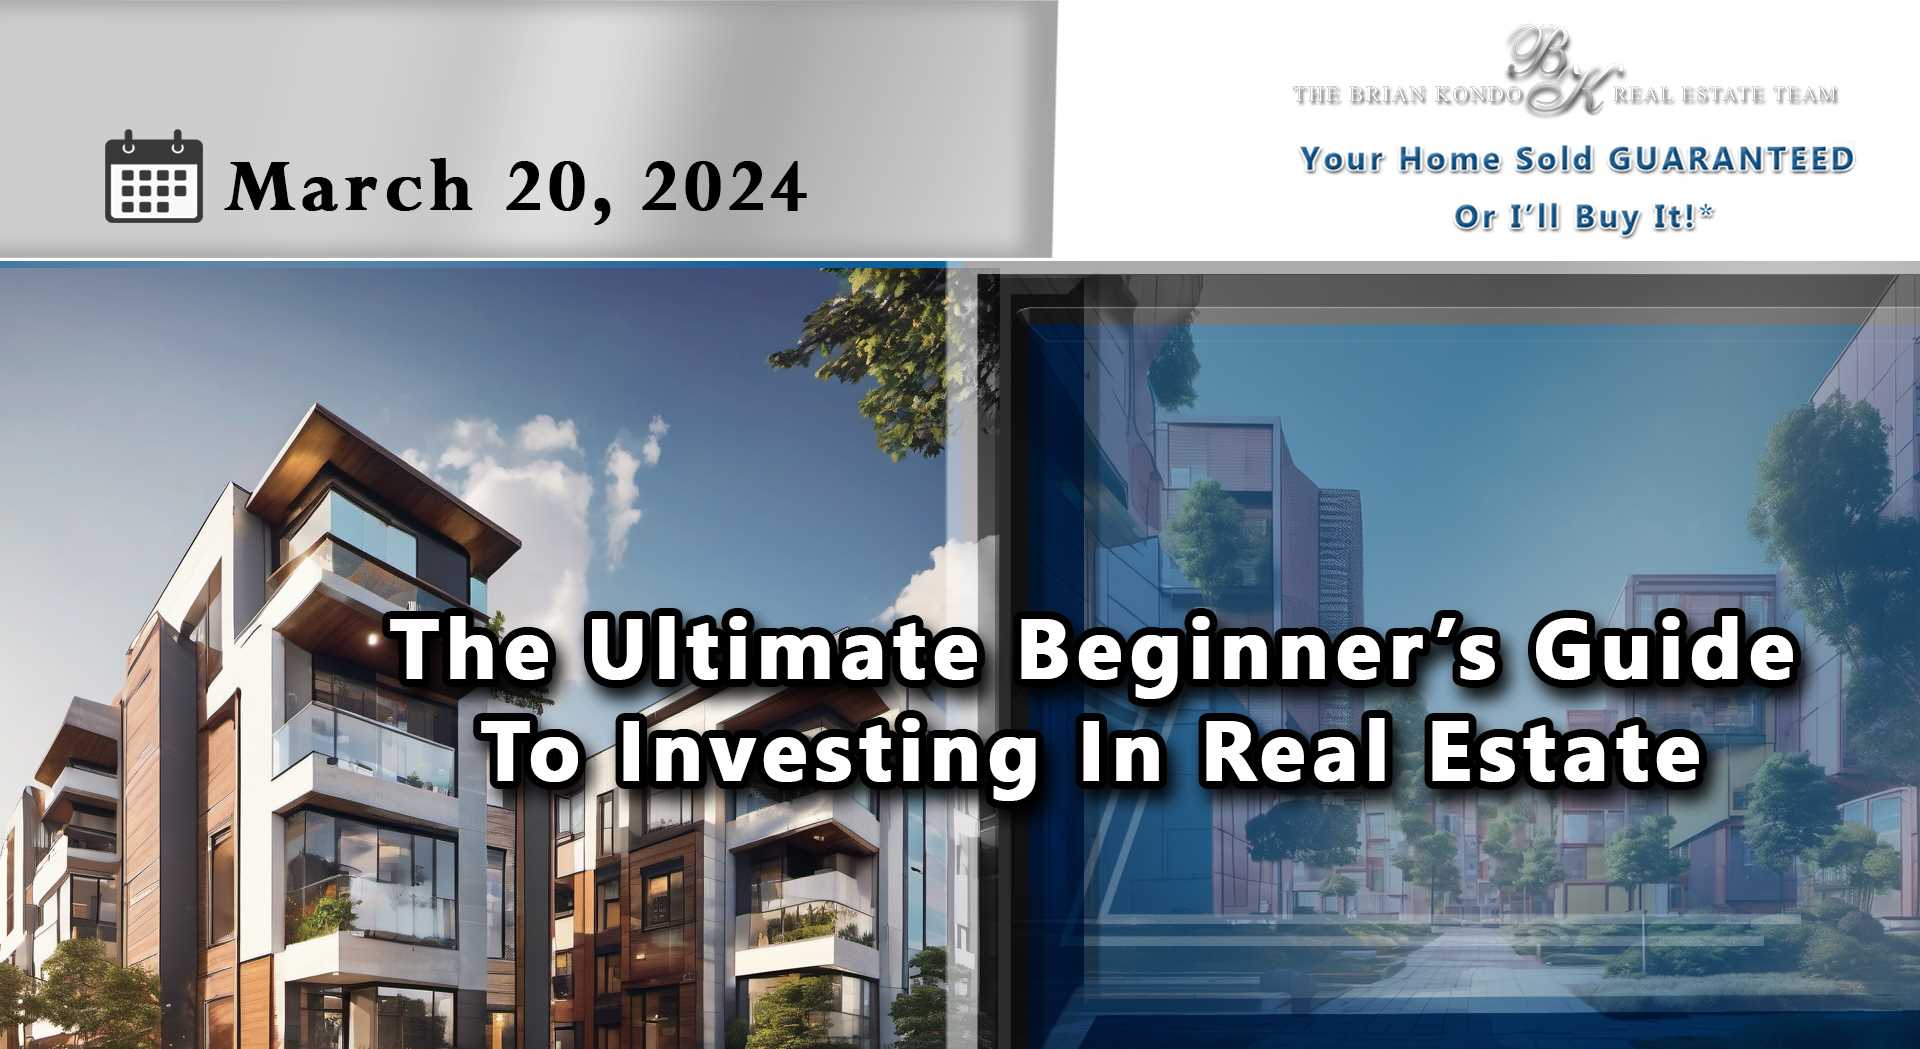 The Ultimate Beginner’s Guide To Investing In Real Estate